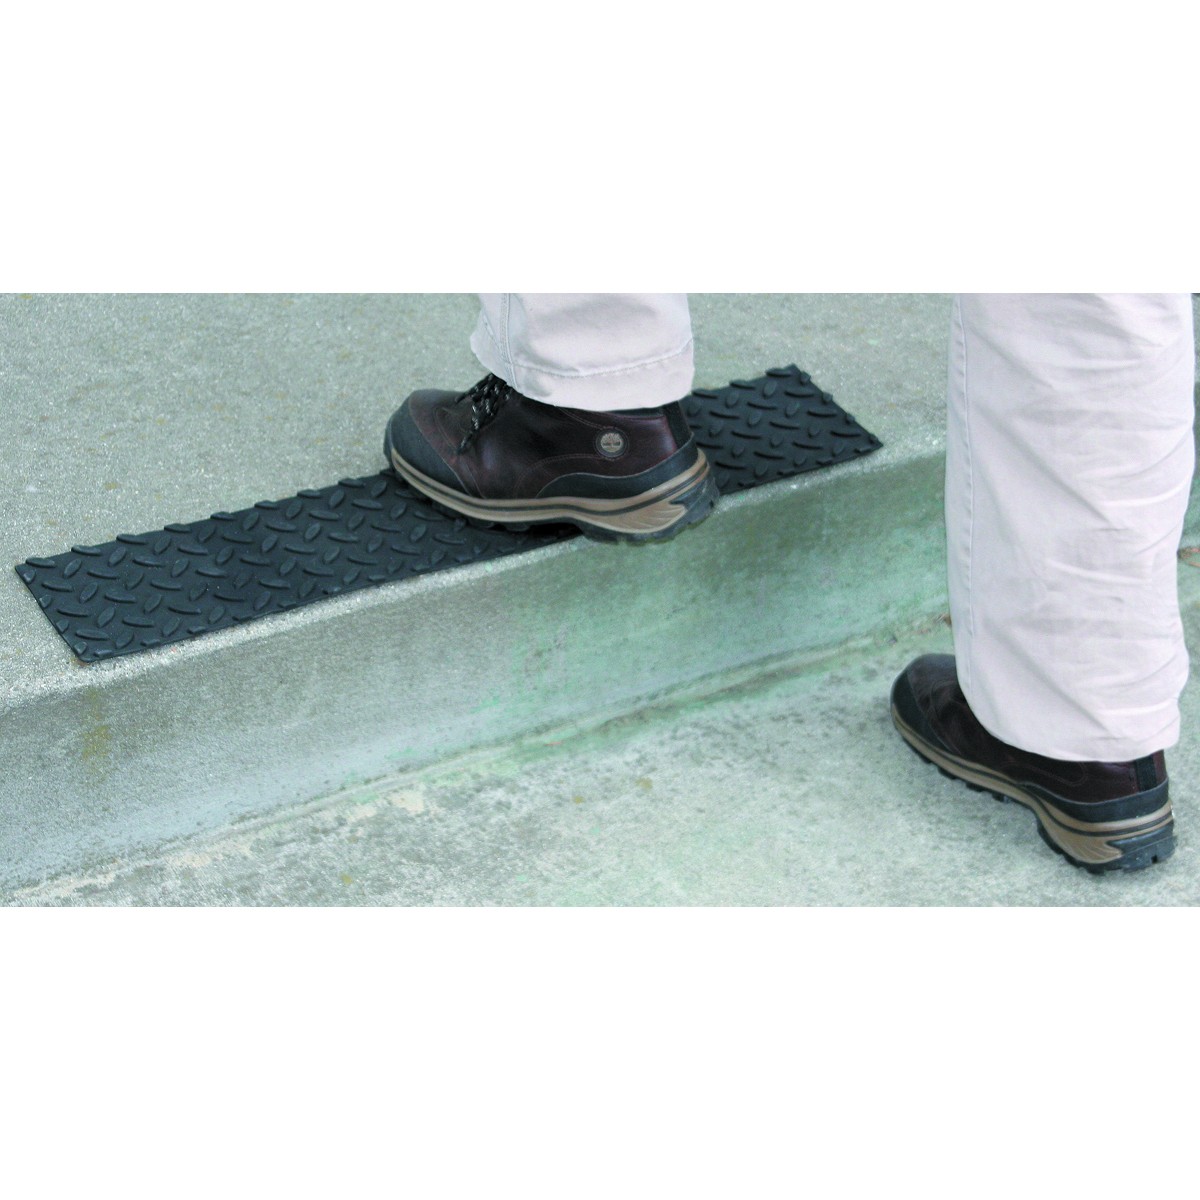 17 in. x 4 in. Self-Adhesive Rubber Safety Mat with Tread Surface